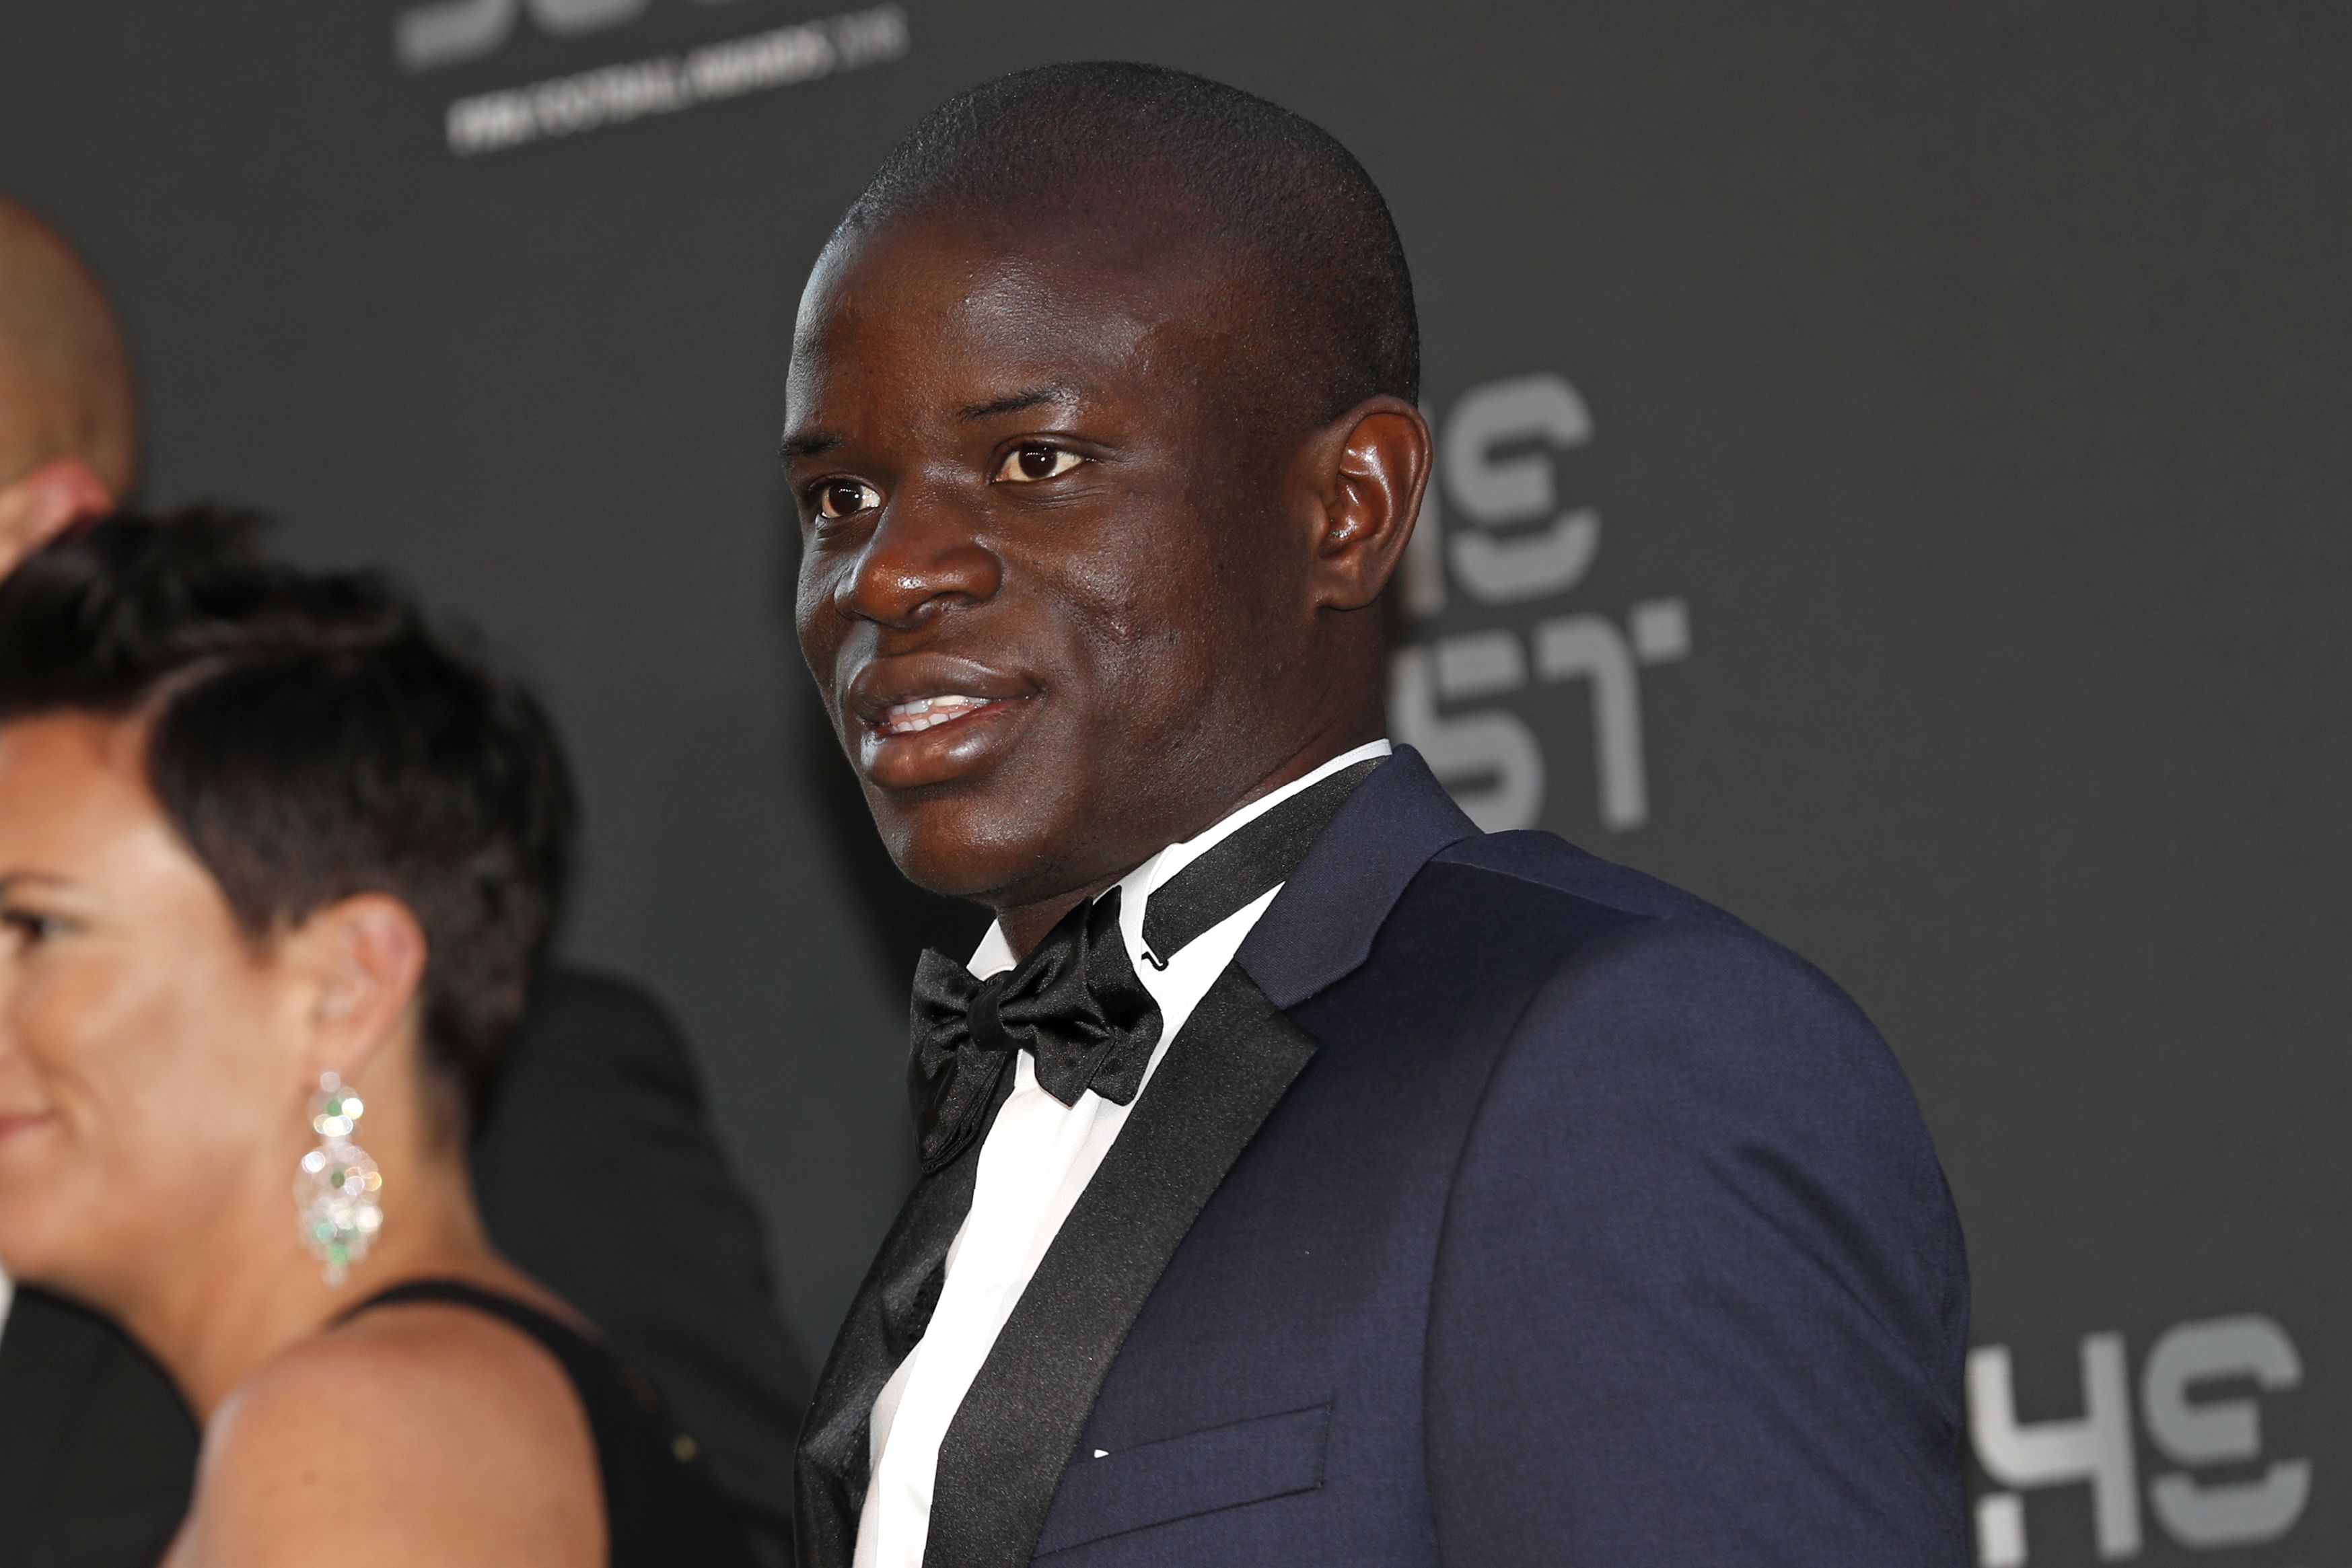 France and Chelsea midfielder N'Golo Kante poses for a photograph as he arrives for The Best FIFA Football Awards ceremony, on September 24, 2018 in London. (Photo by Adrian DENNIS / AFP)        (Photo credit should read ADRIAN DENNIS/AFP/Getty Images)